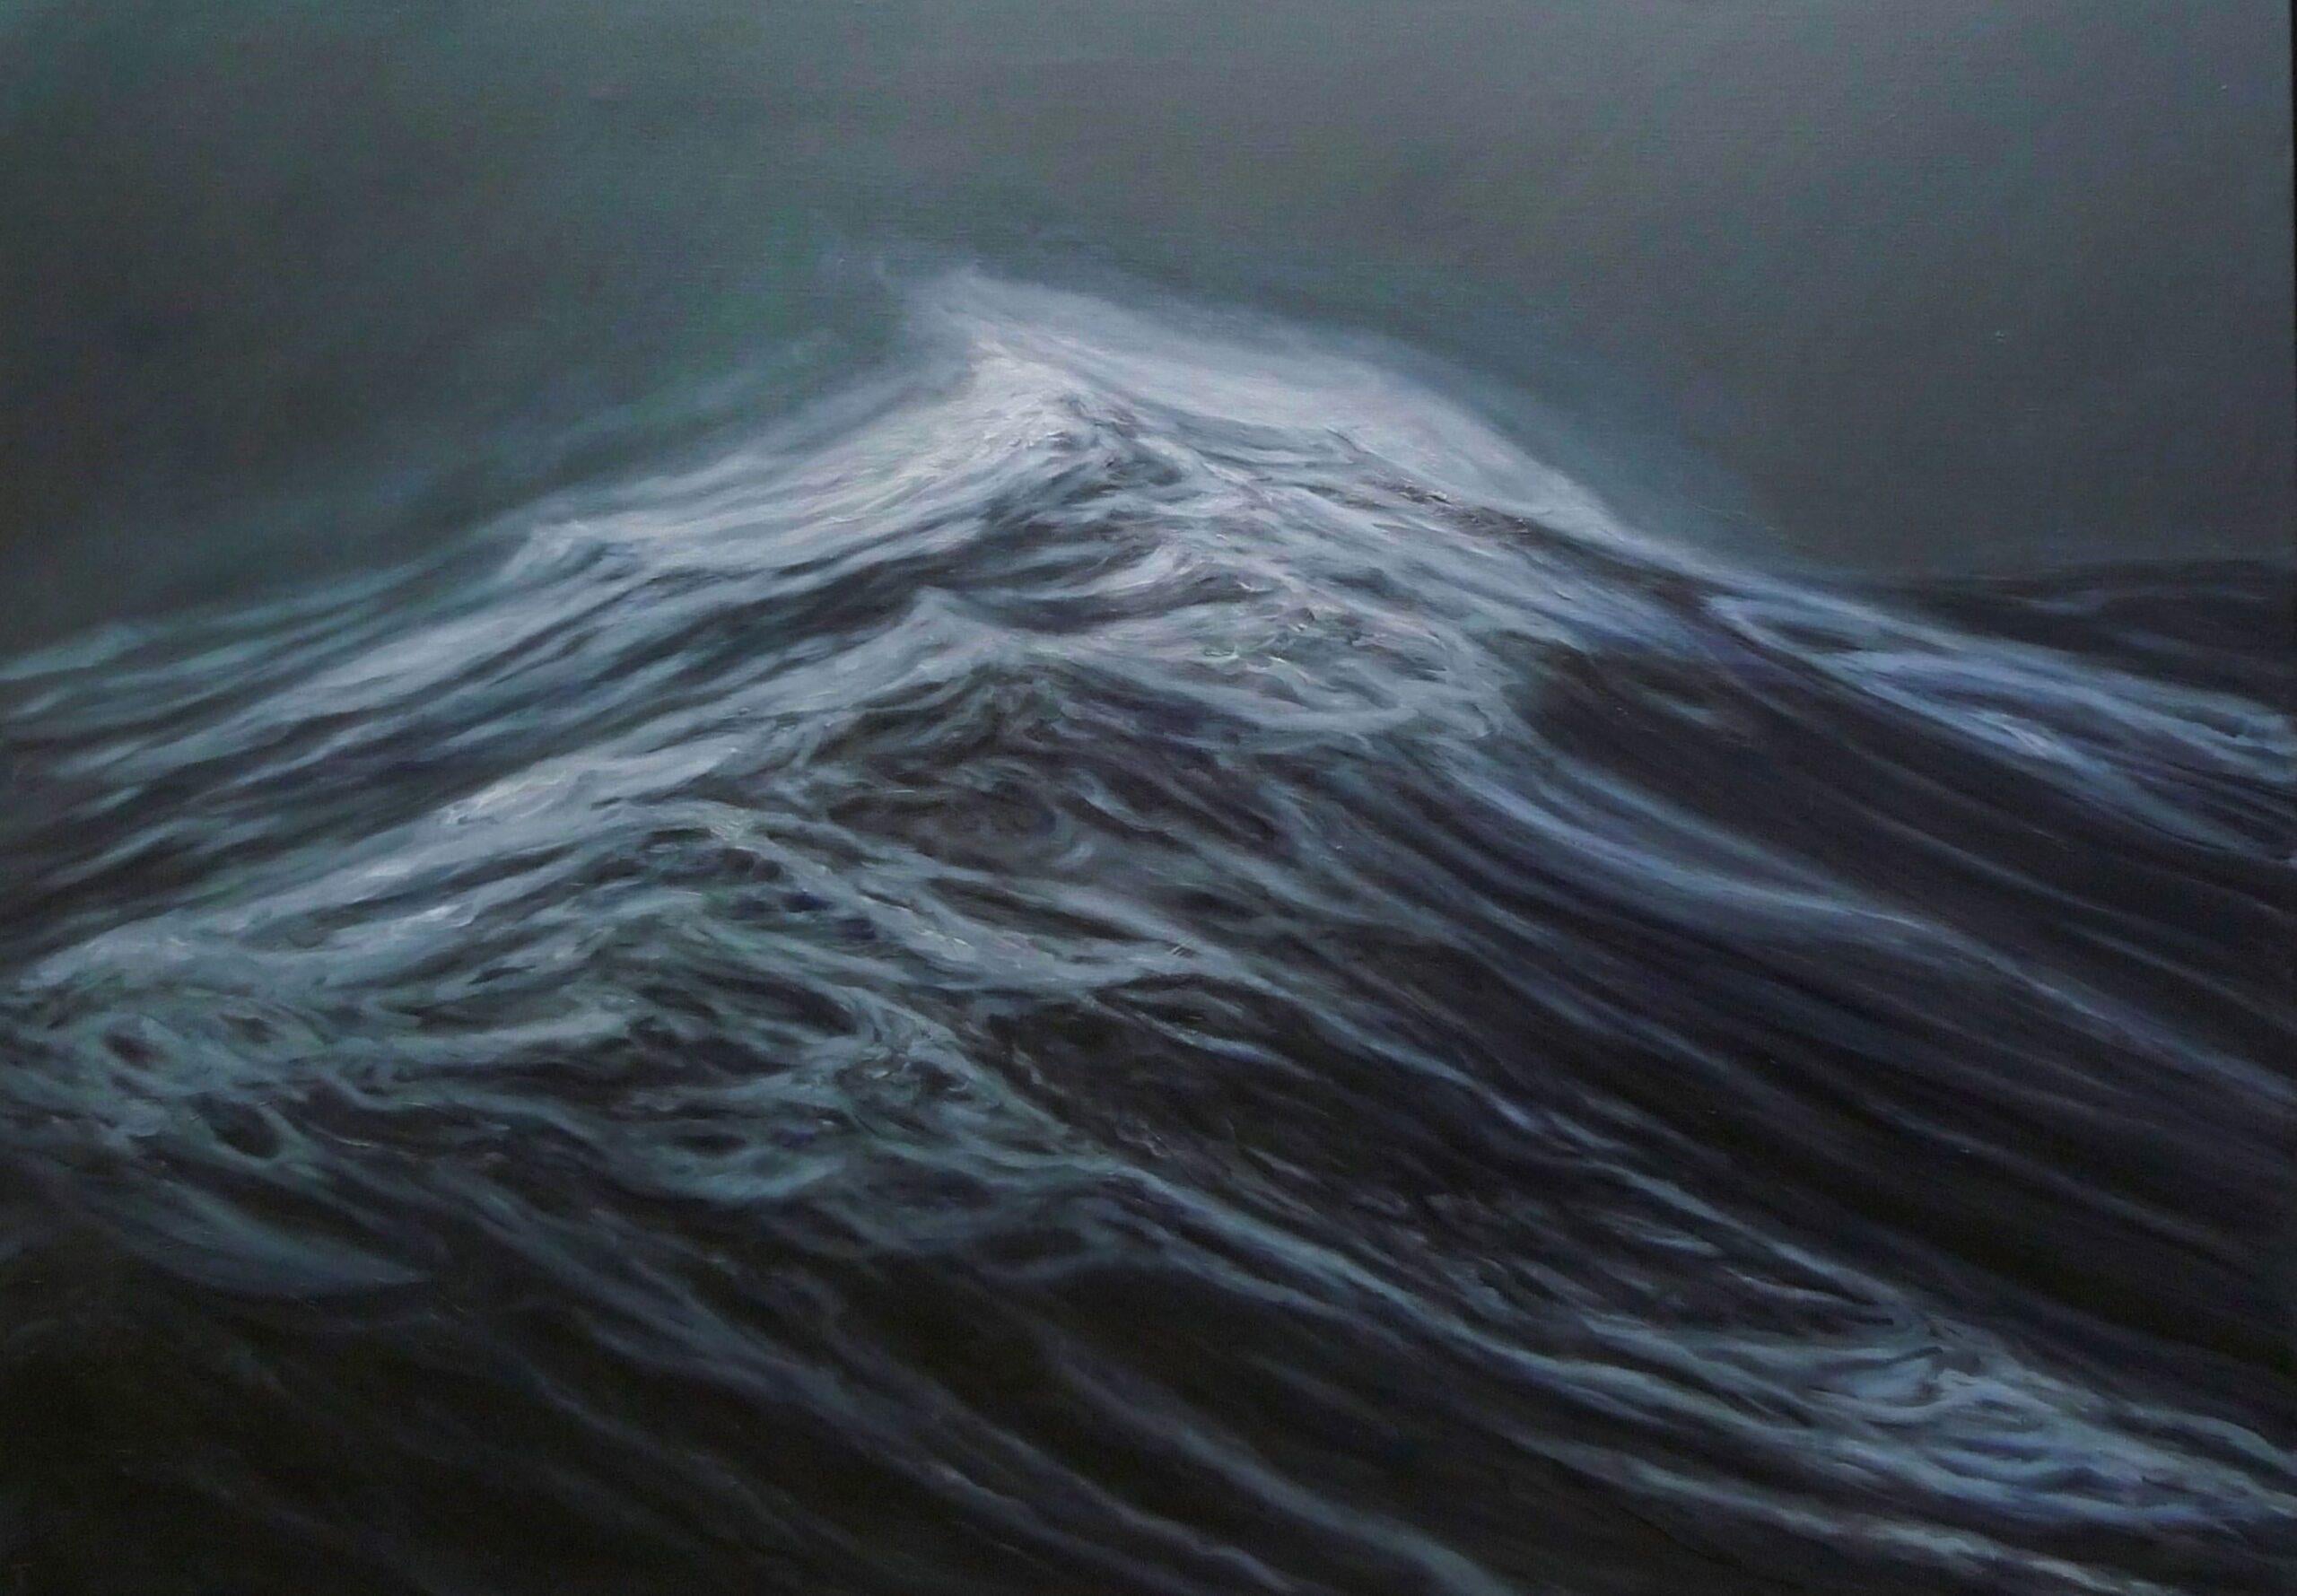 The unfathomable sea is a unique oil on linen painting by contemporary artist Franco Salas Borquez, dimensions are 162 × 114 cm (63.8 × 44.9 in). Dimensions of the framed artwork are 118 x 166 cm (46.4 x 65.3 in).
The artwork is signed, sold framed